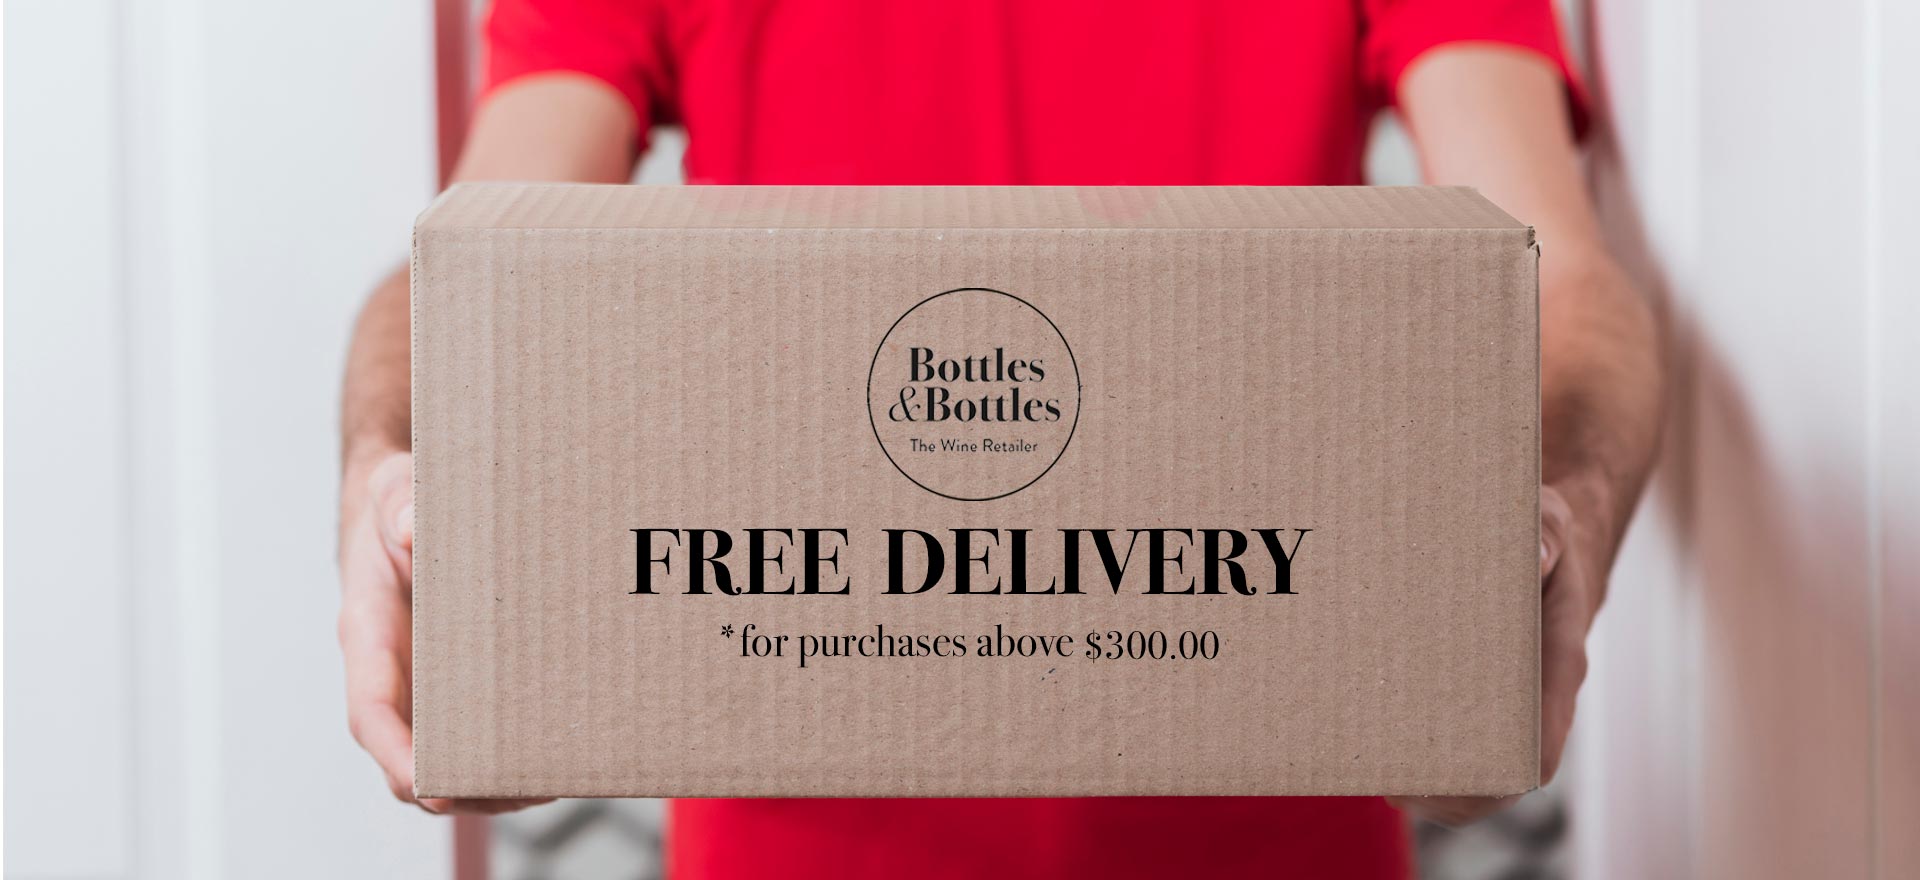 $300 free delivery